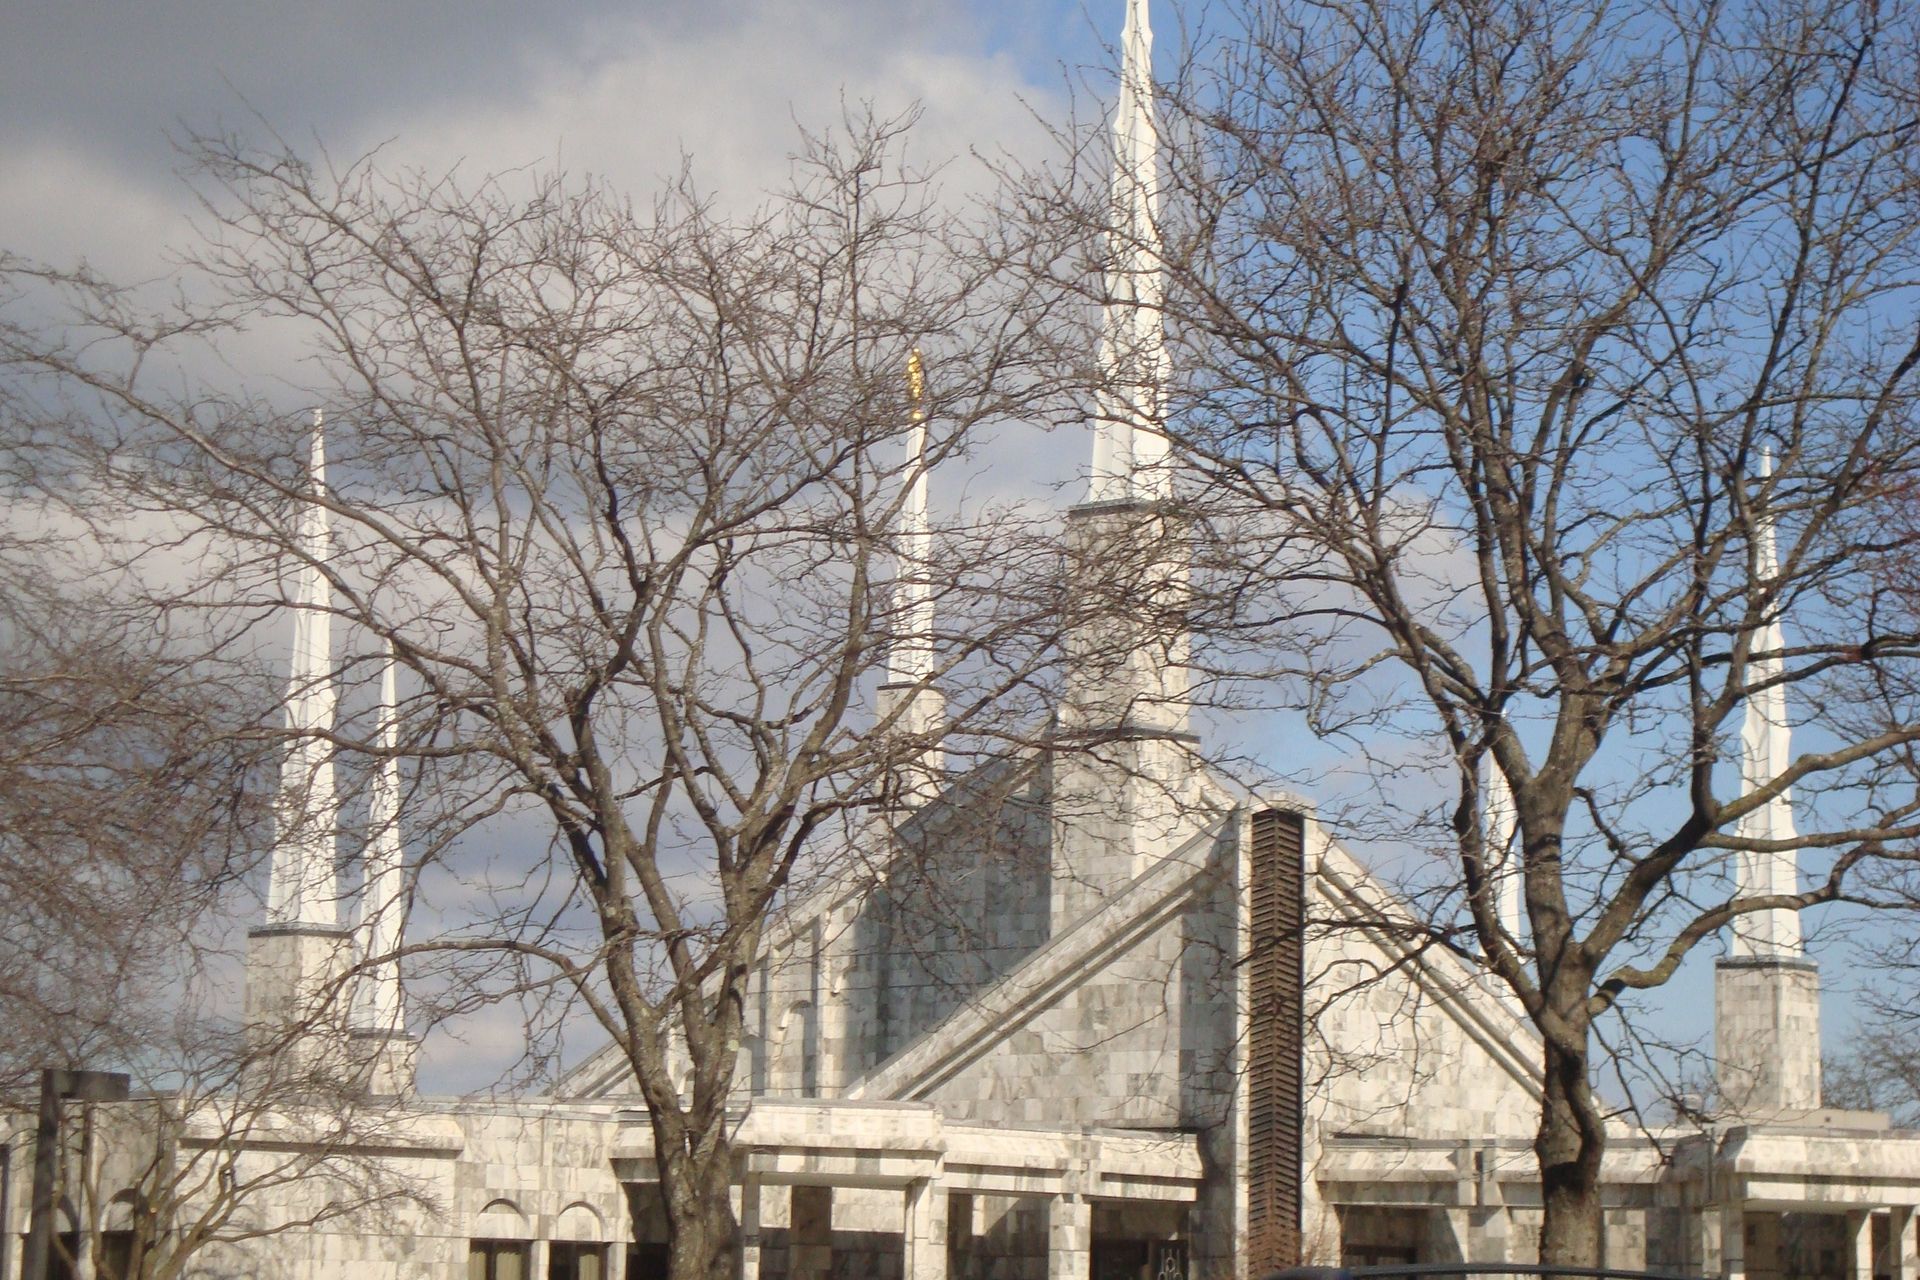 The six spires of the Chicago Illinois Temple show through the branches of the trees during the winter season.